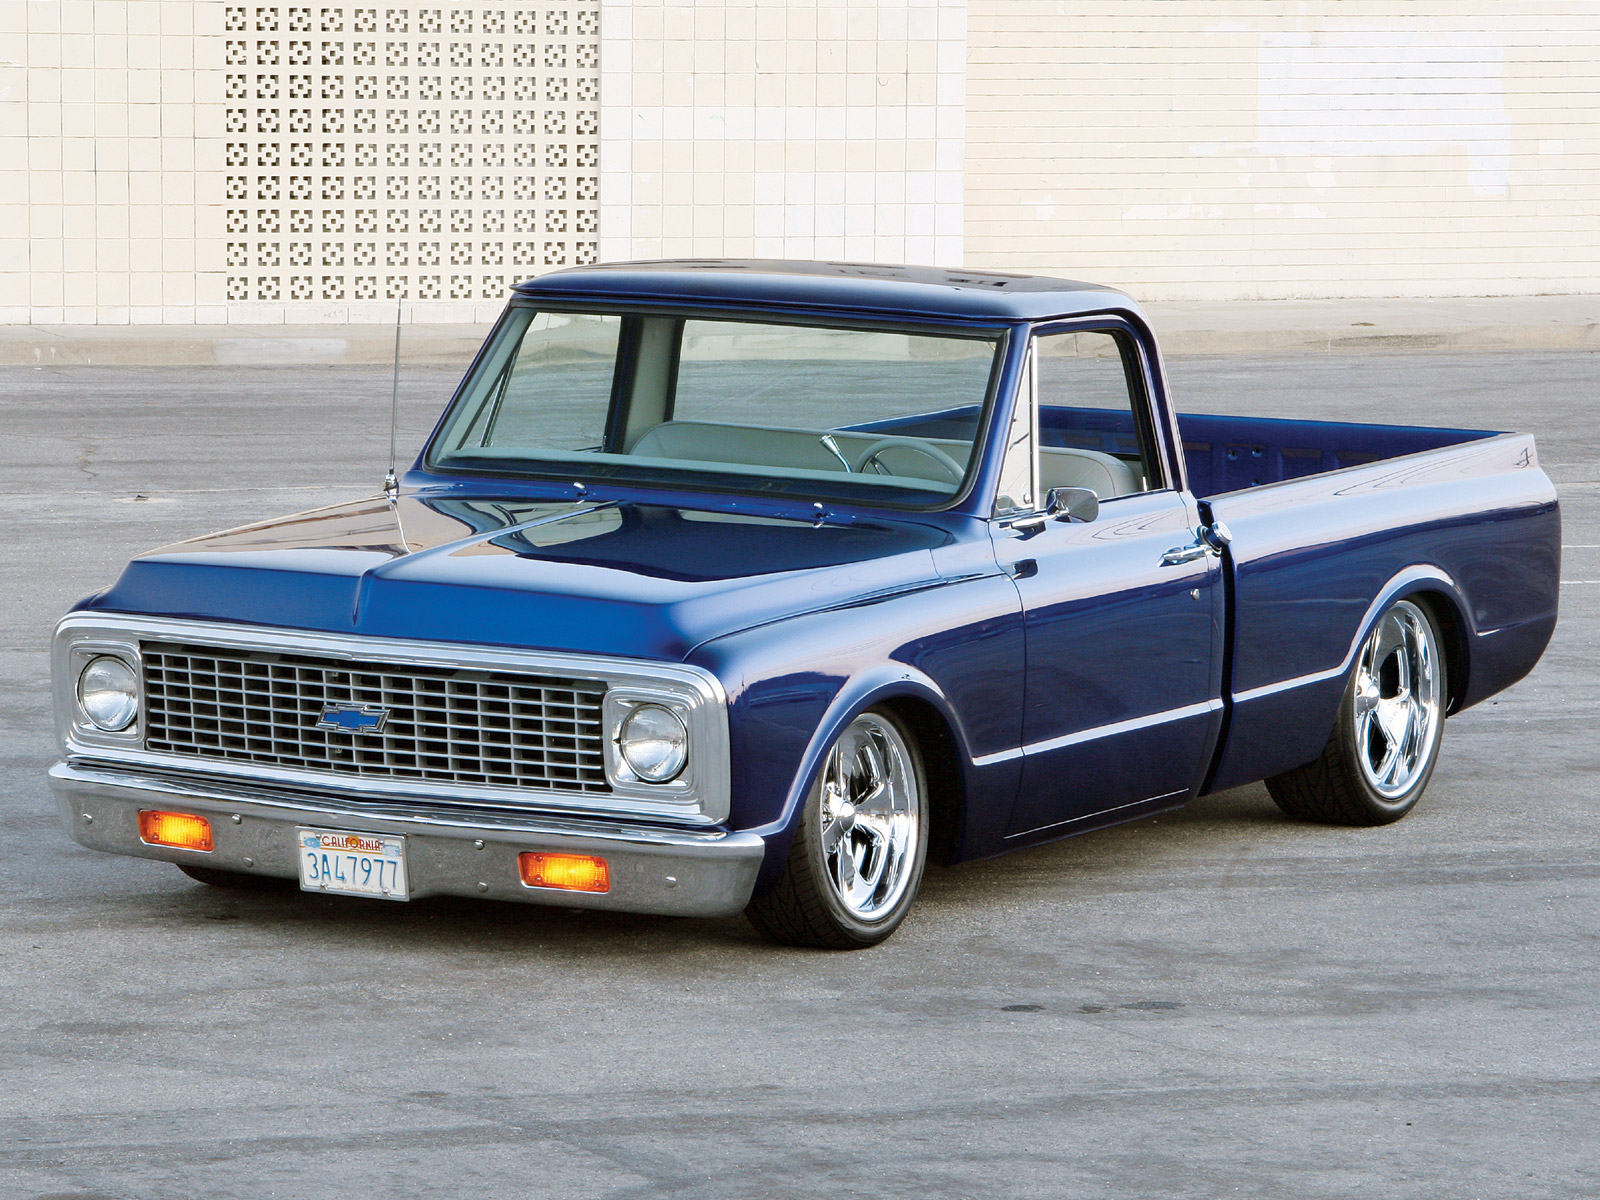 1972 Chevrolet C10 Wallpapers Vehicles Hq 1972 Chevrolet C10 Pictures 4k Wallpapers 2019